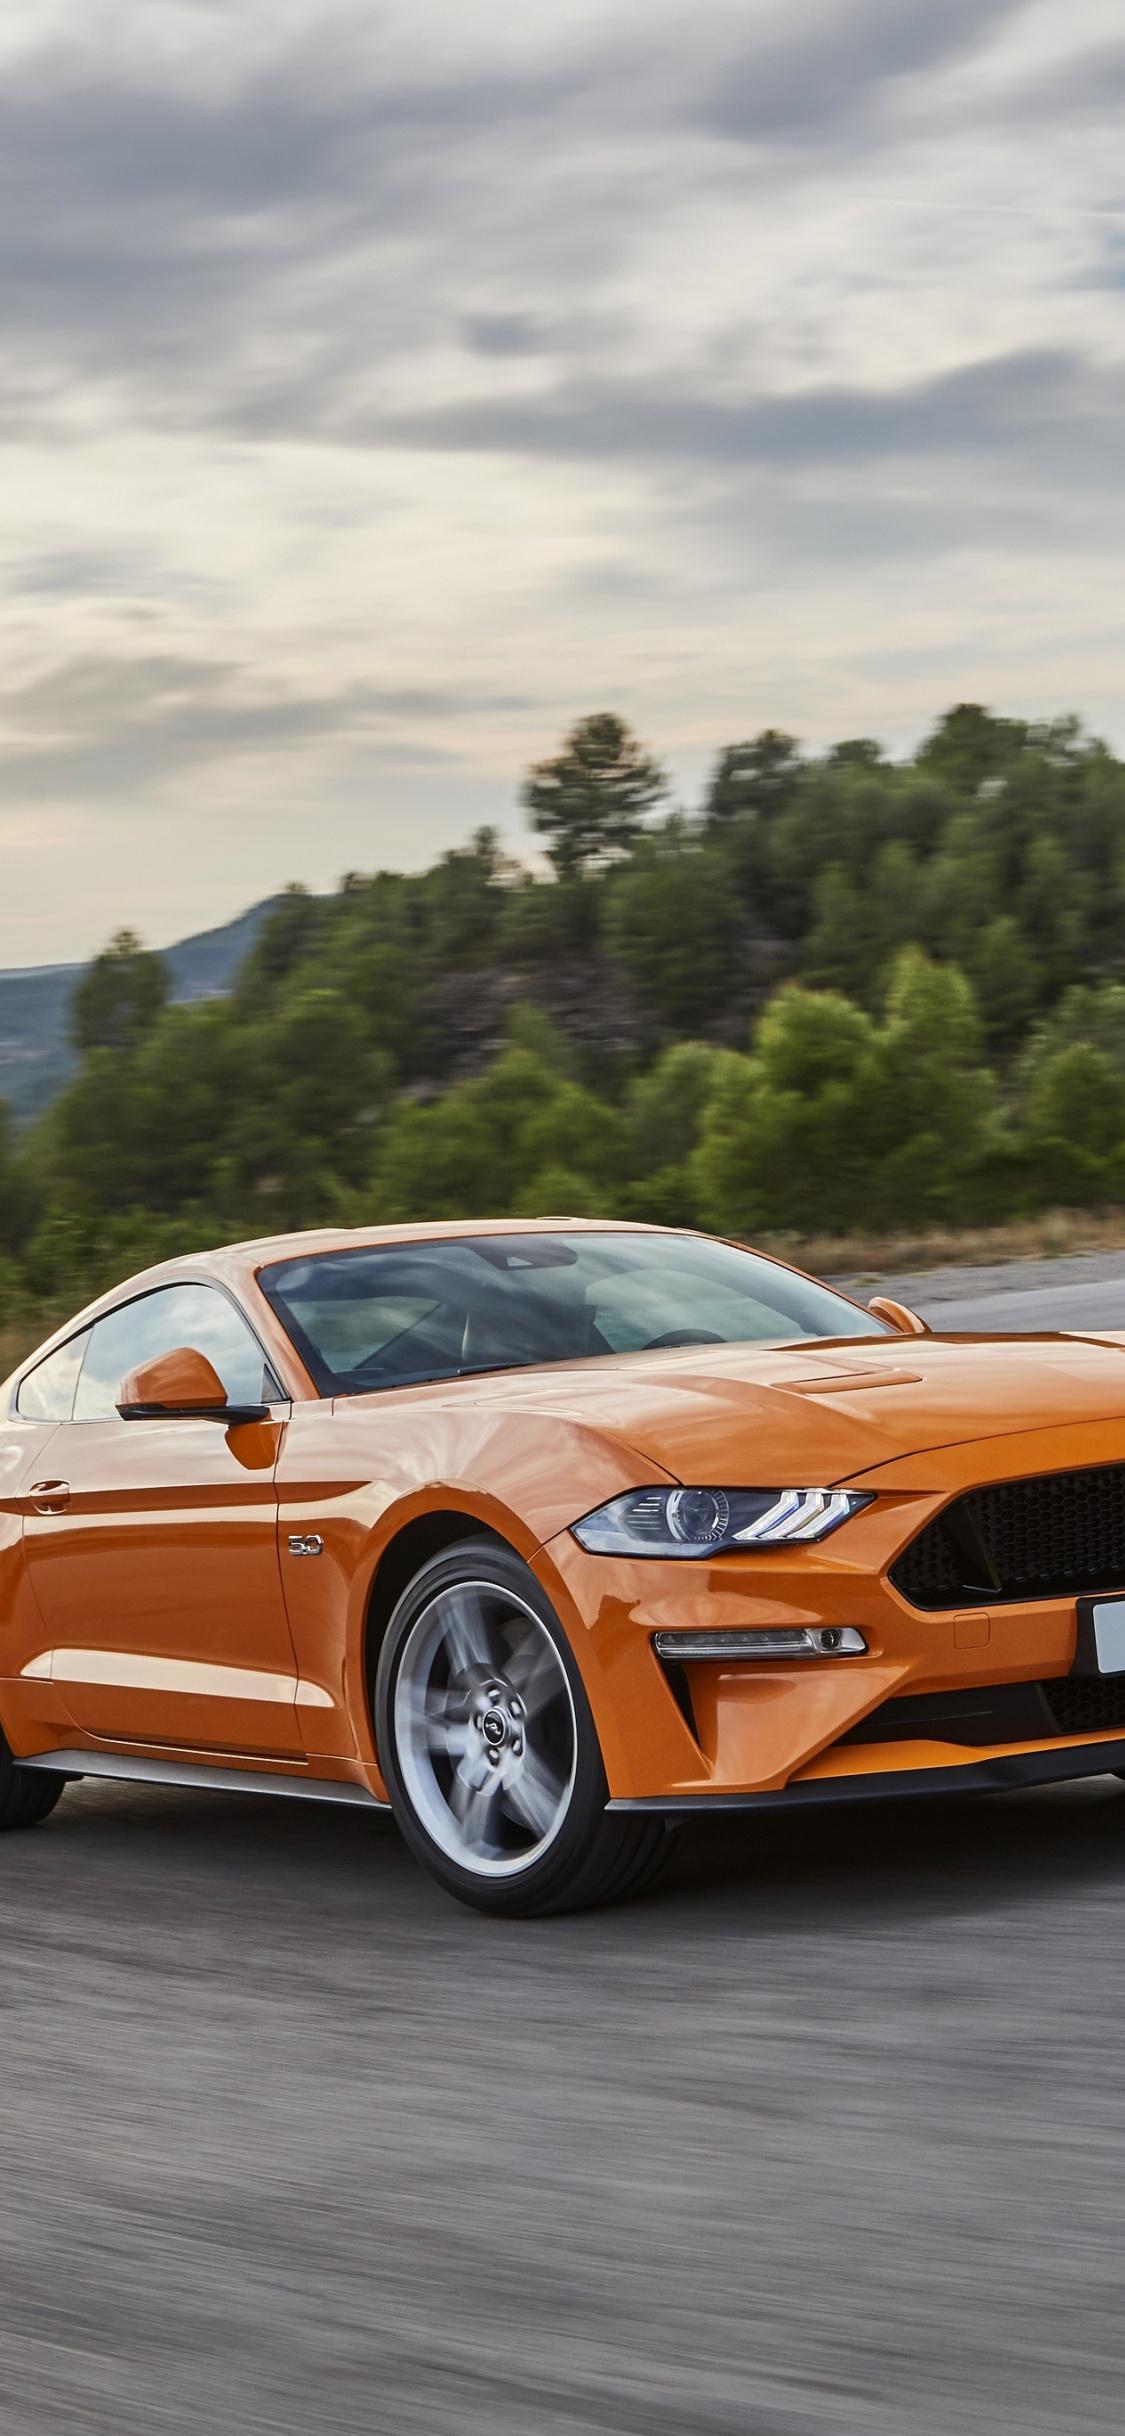 Mustang Car Wallpapers For Iphone